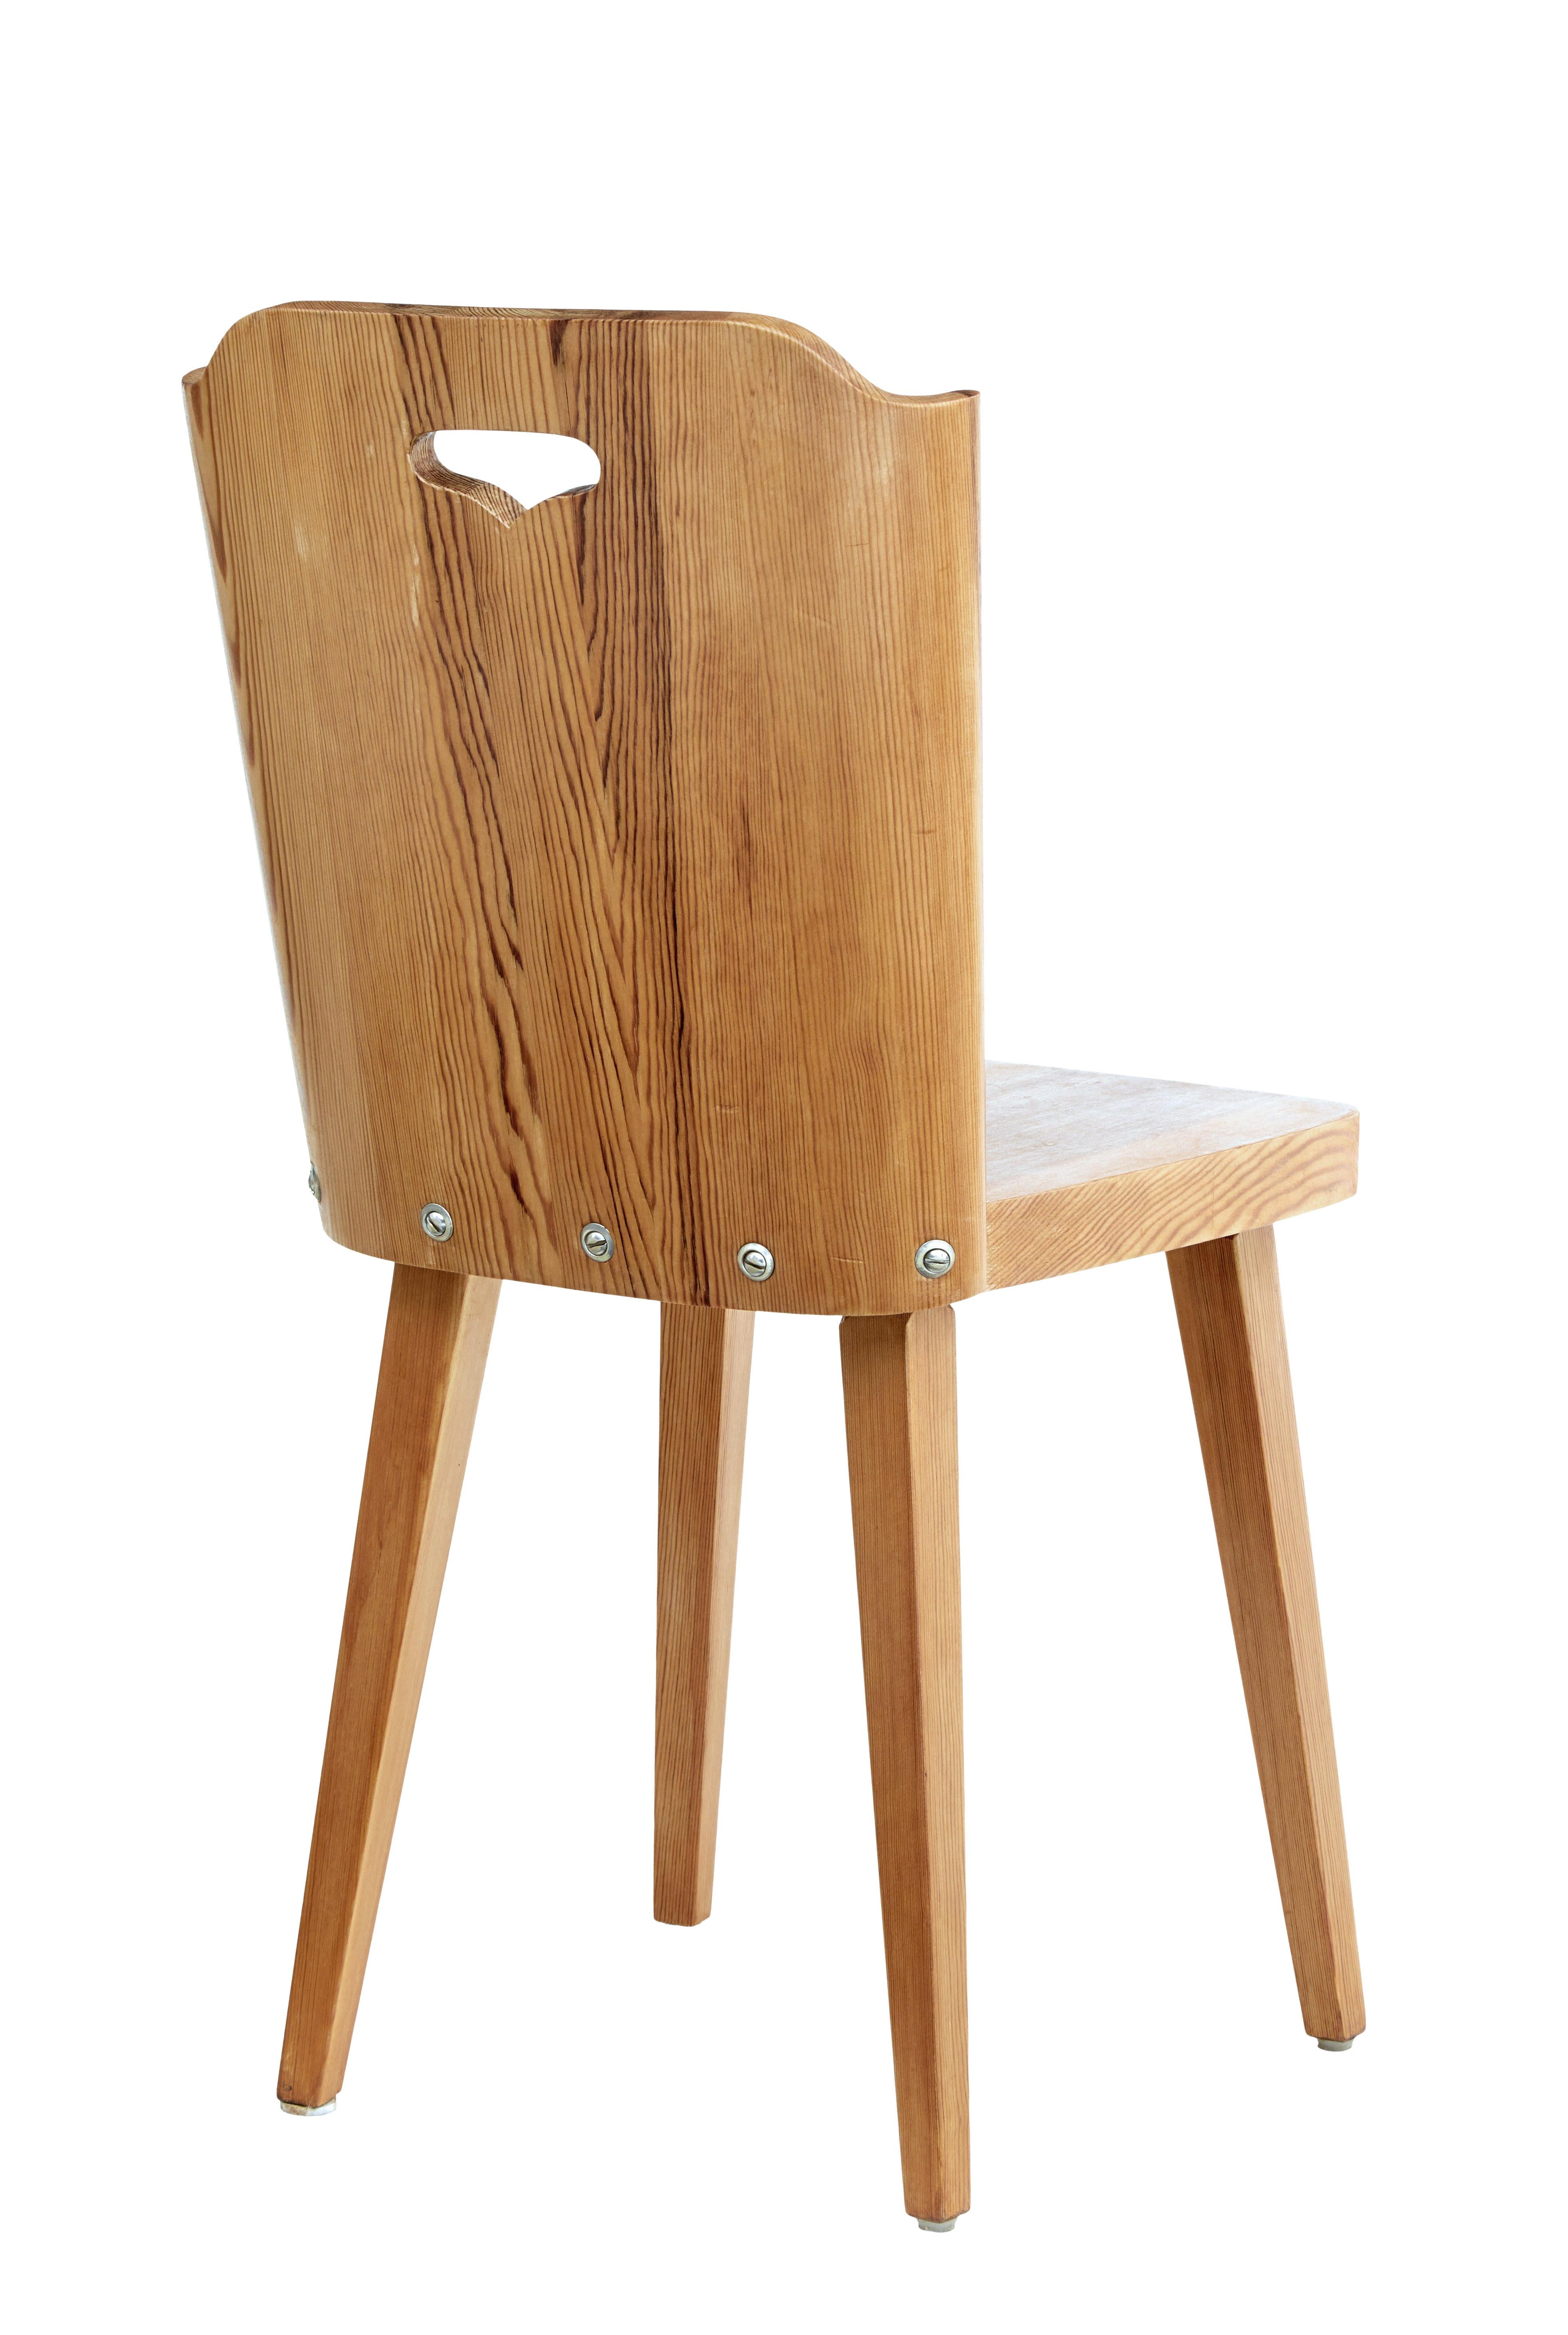 Set of 6 1960s Swedish Pine Dining Chairs In Good Condition In Debenham, Suffolk